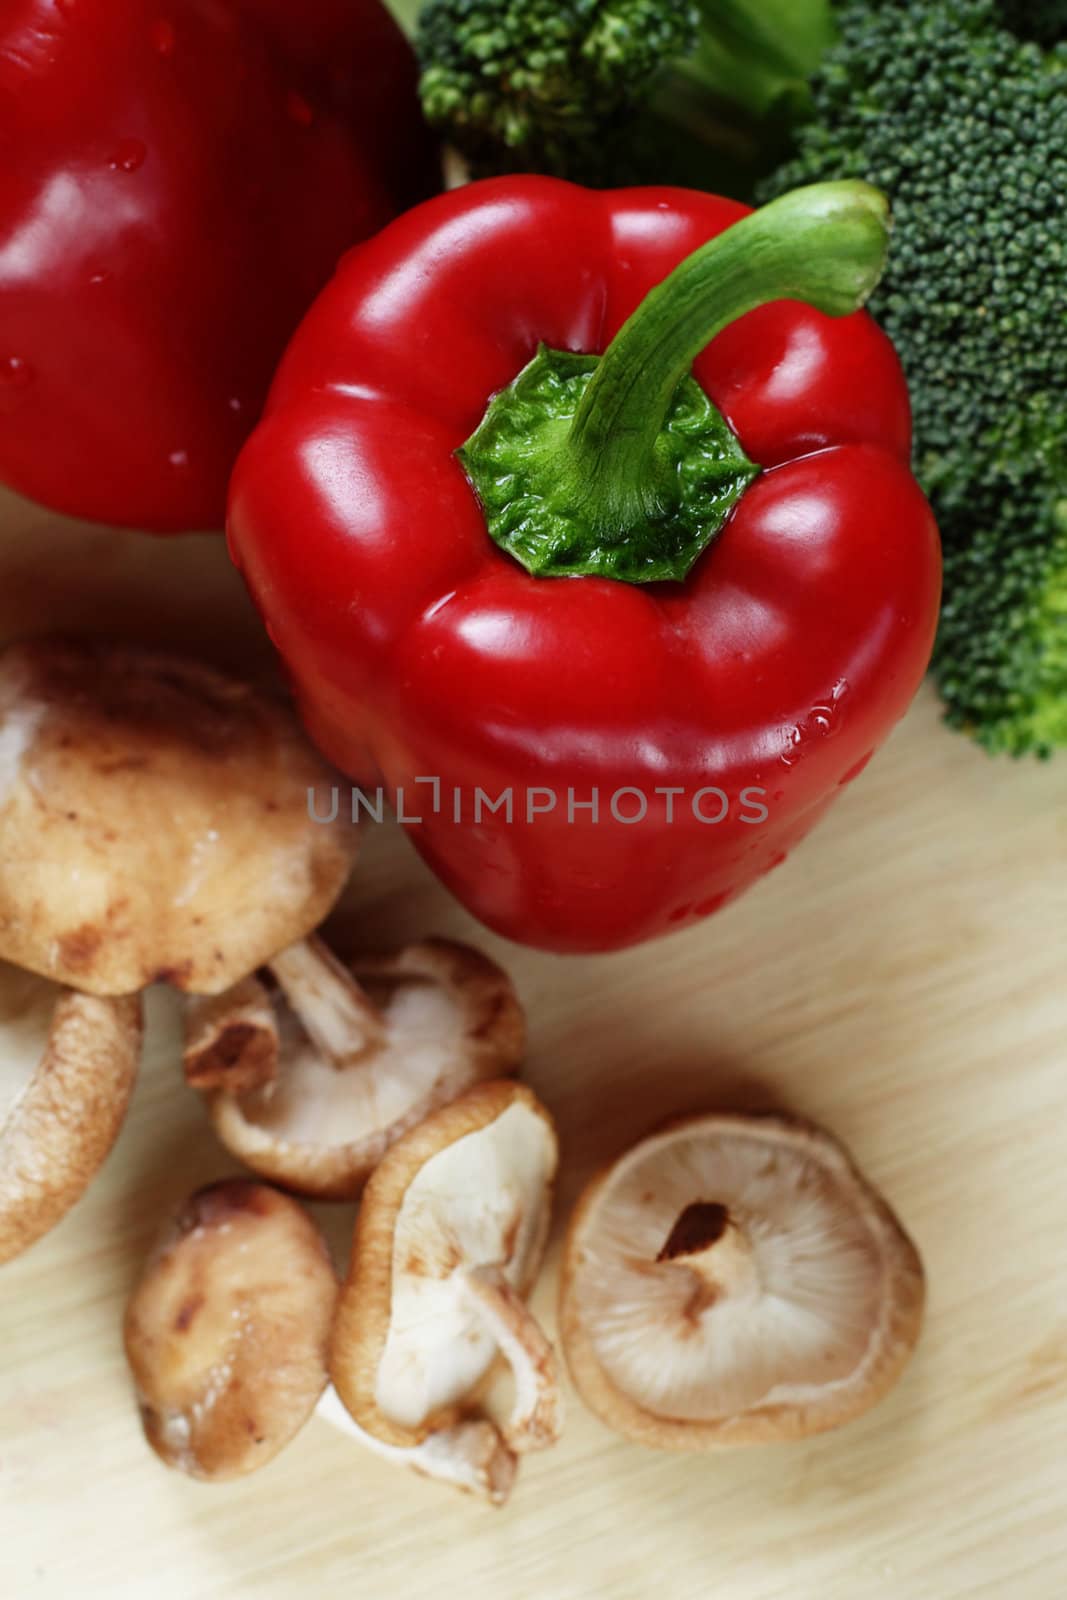 Vegetables on a kitchen table: red pepper, broccoli and shiitake mushrooms